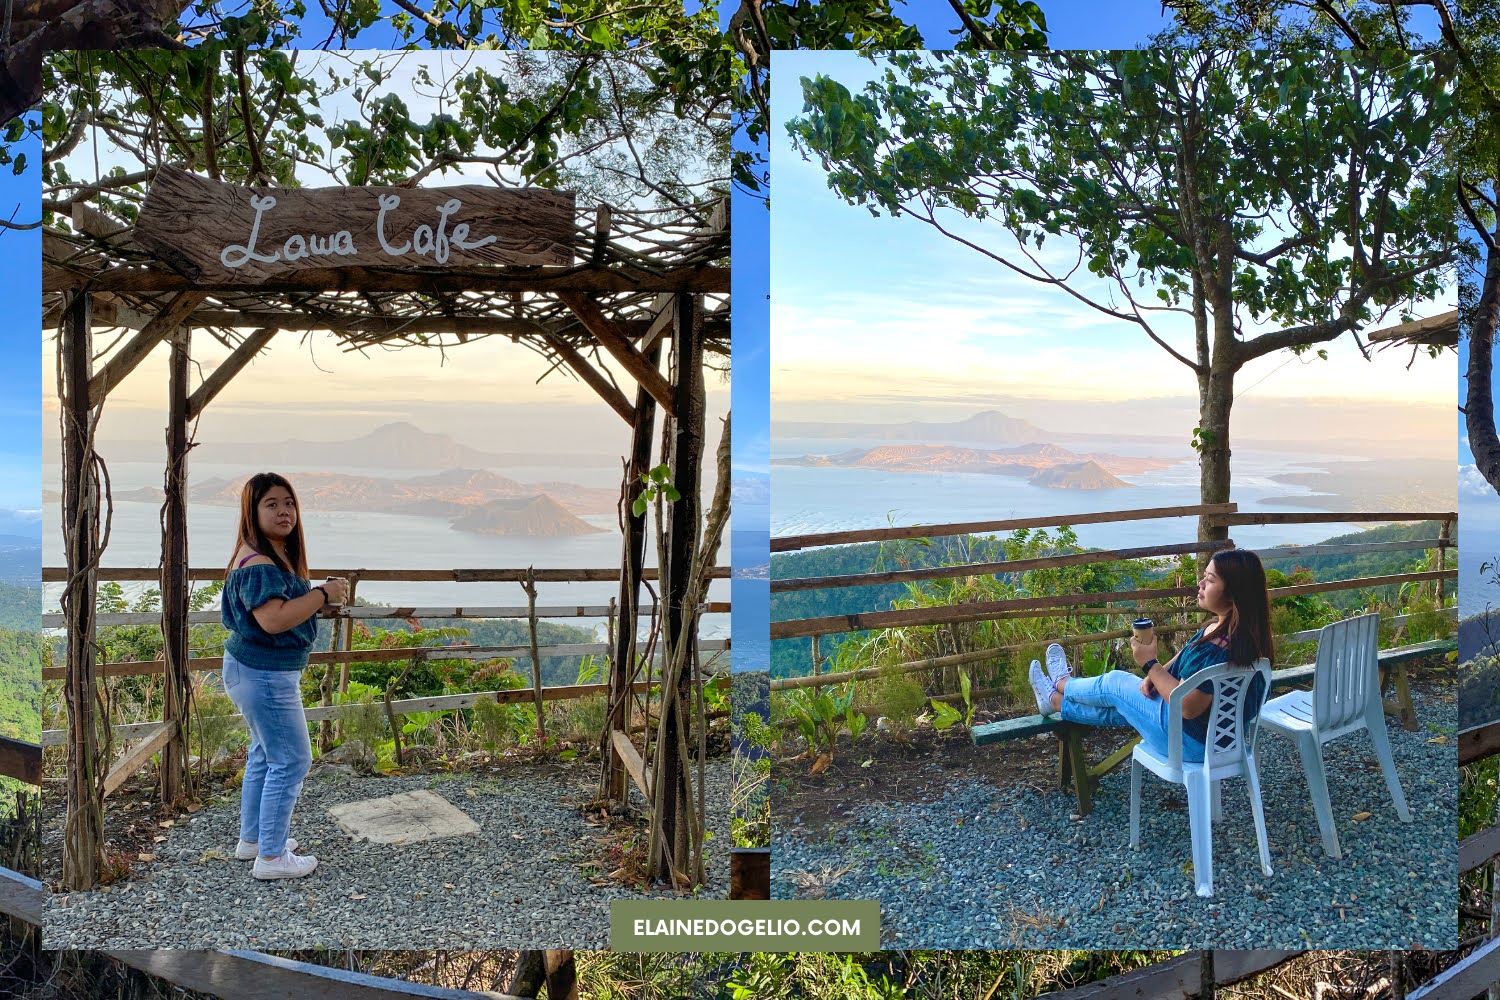 Enjoy Filipino Food and the Overlooking View of Taal Lake at Lawa Cafe